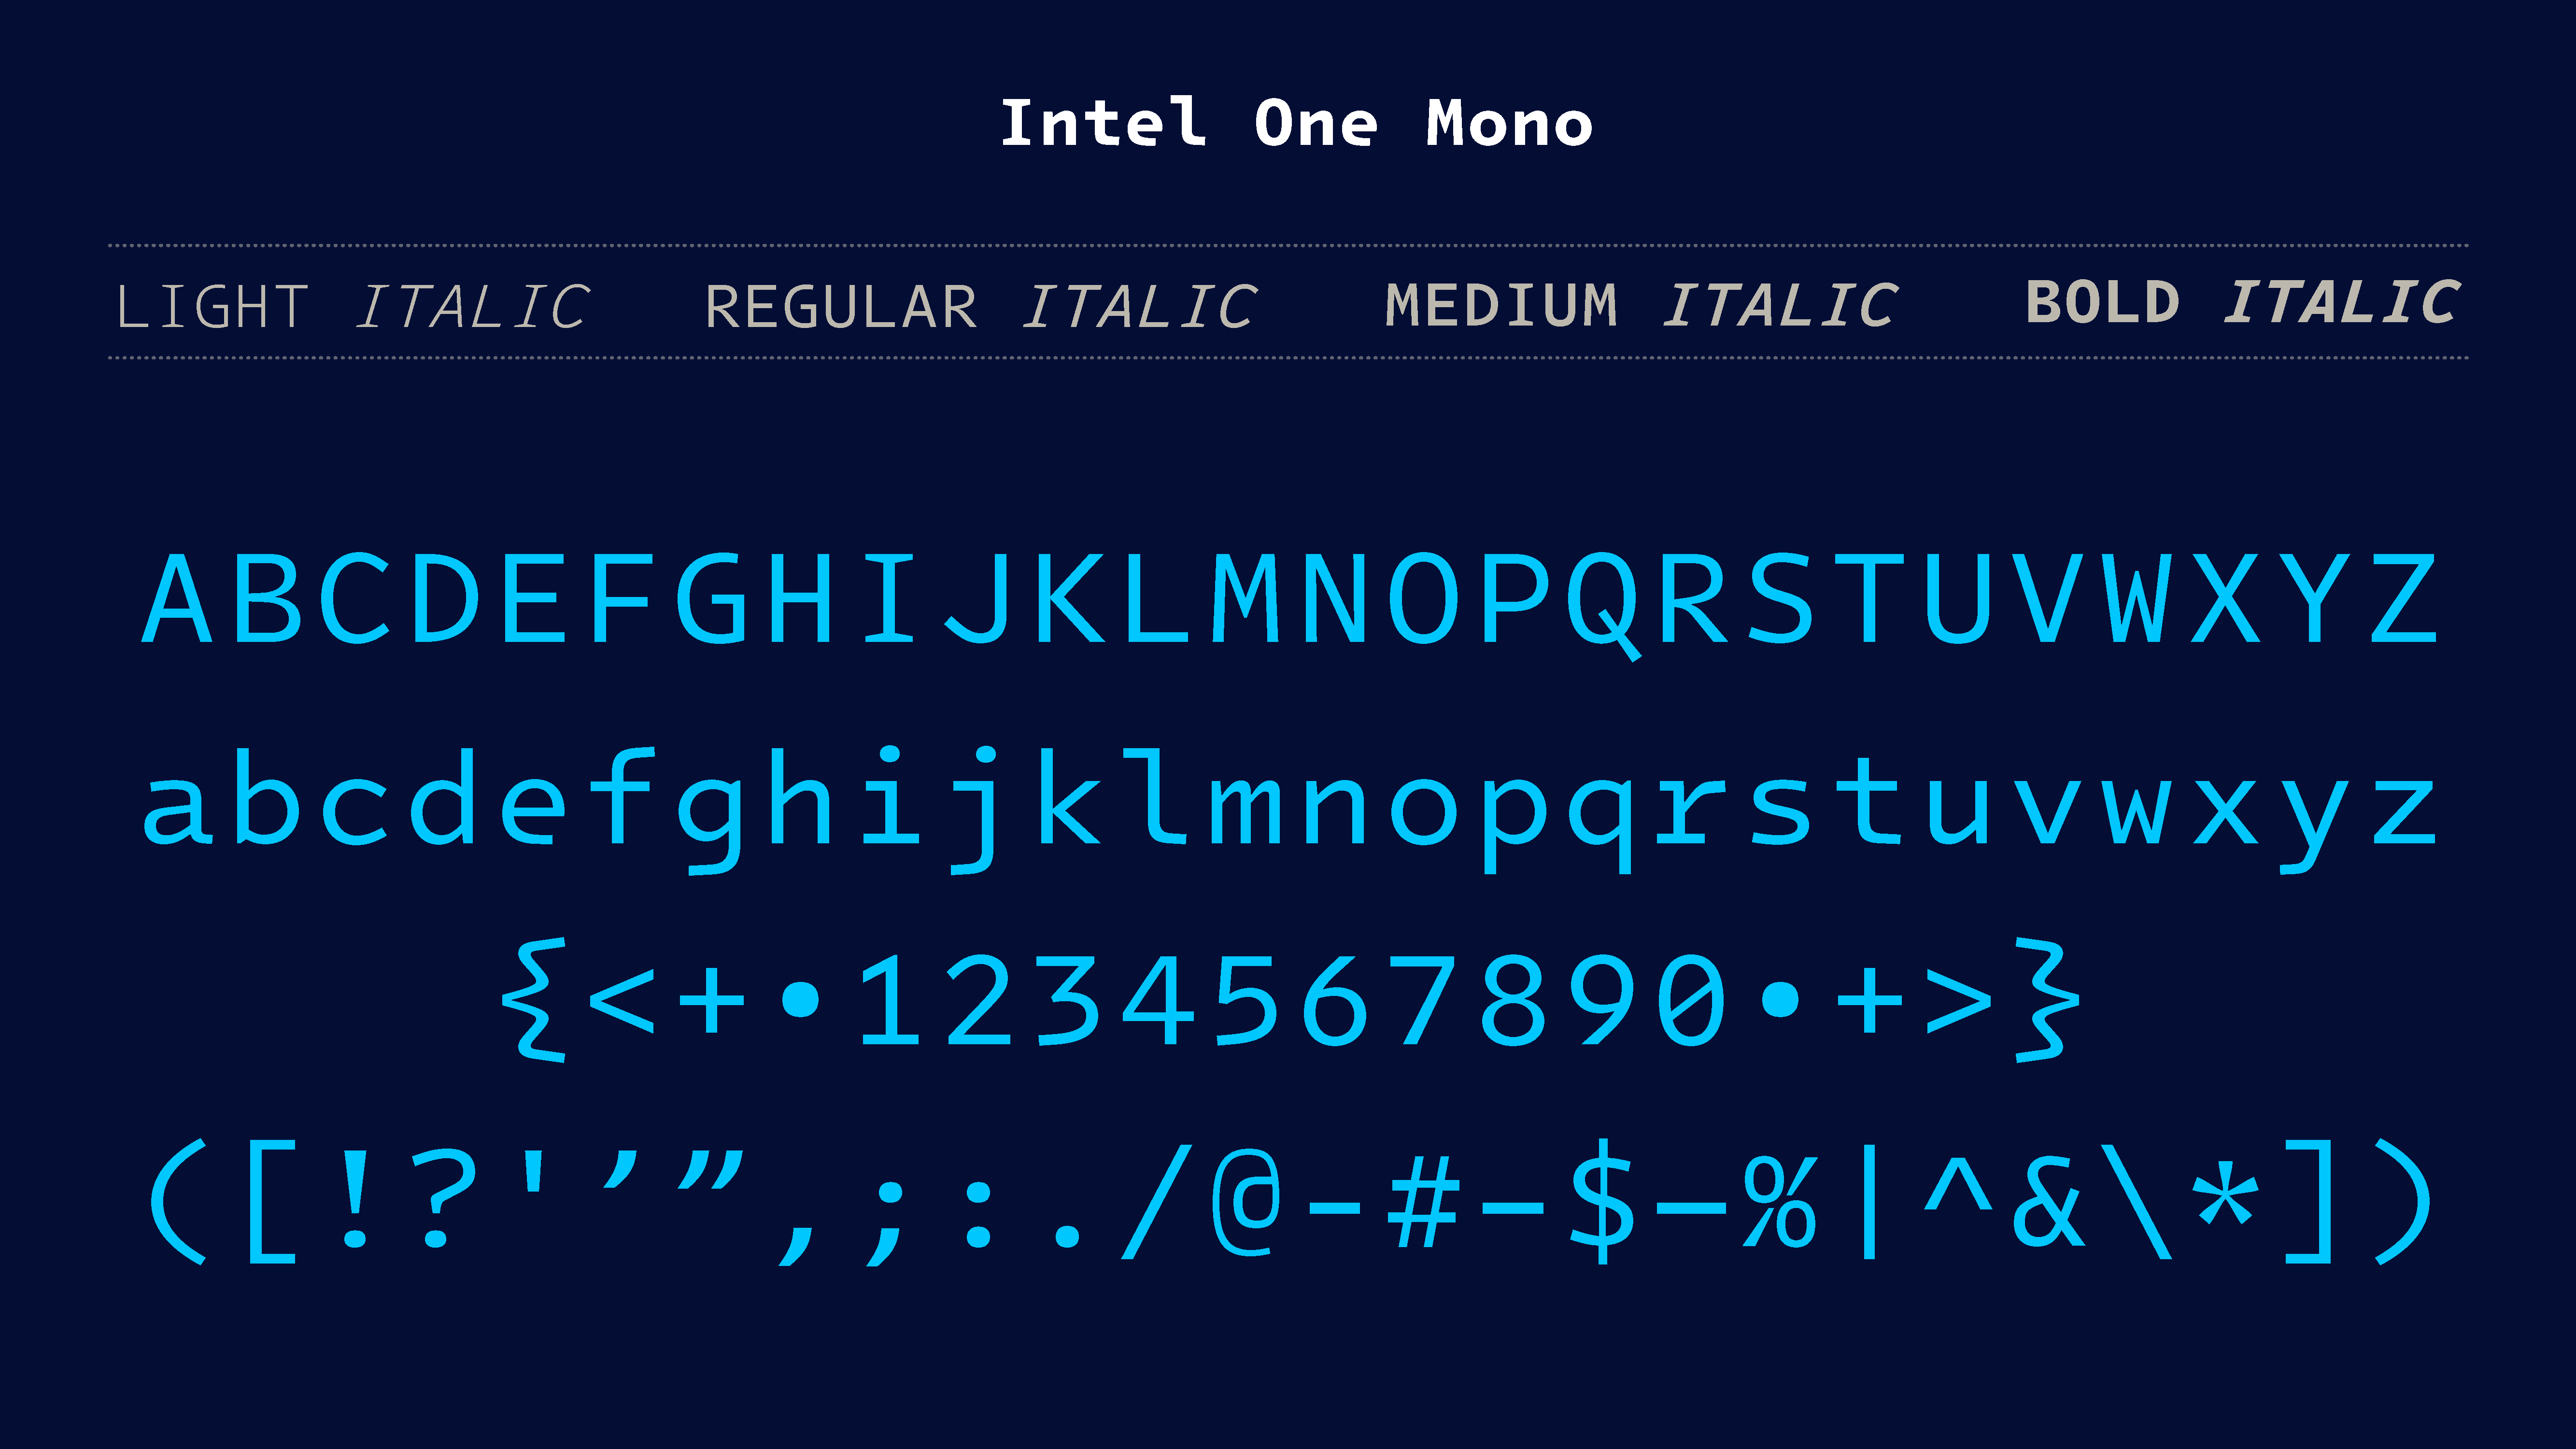 A demonstrative picture of the One Mono font, showing several characters written in the font.